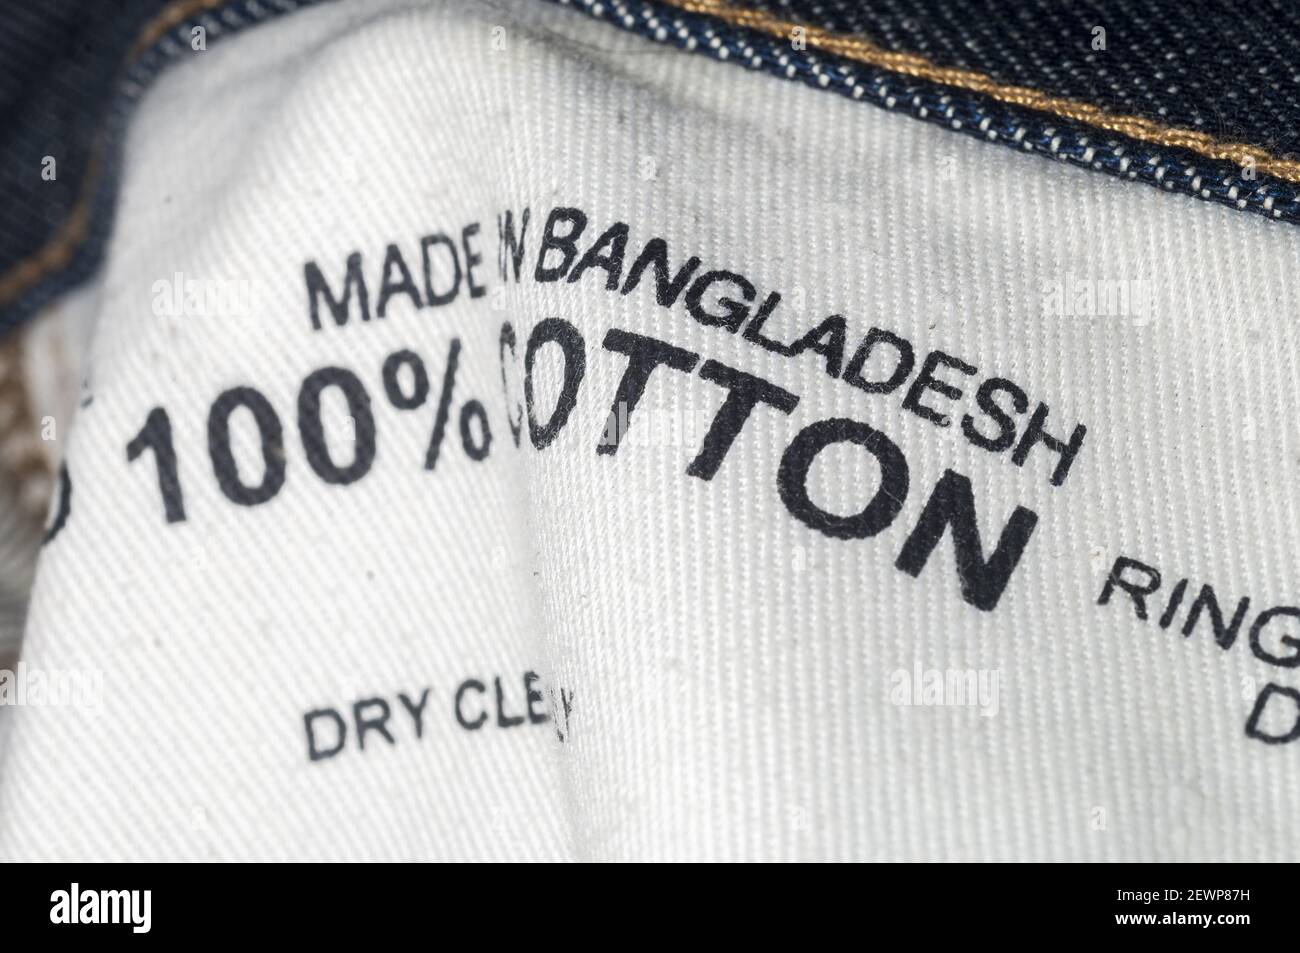 A label on a pair of jeans shows Bangladesh as the country of origin, seen  on Wednesday, December 7, 2016. A report released by the Overseas  Development Institute found that 15 percent